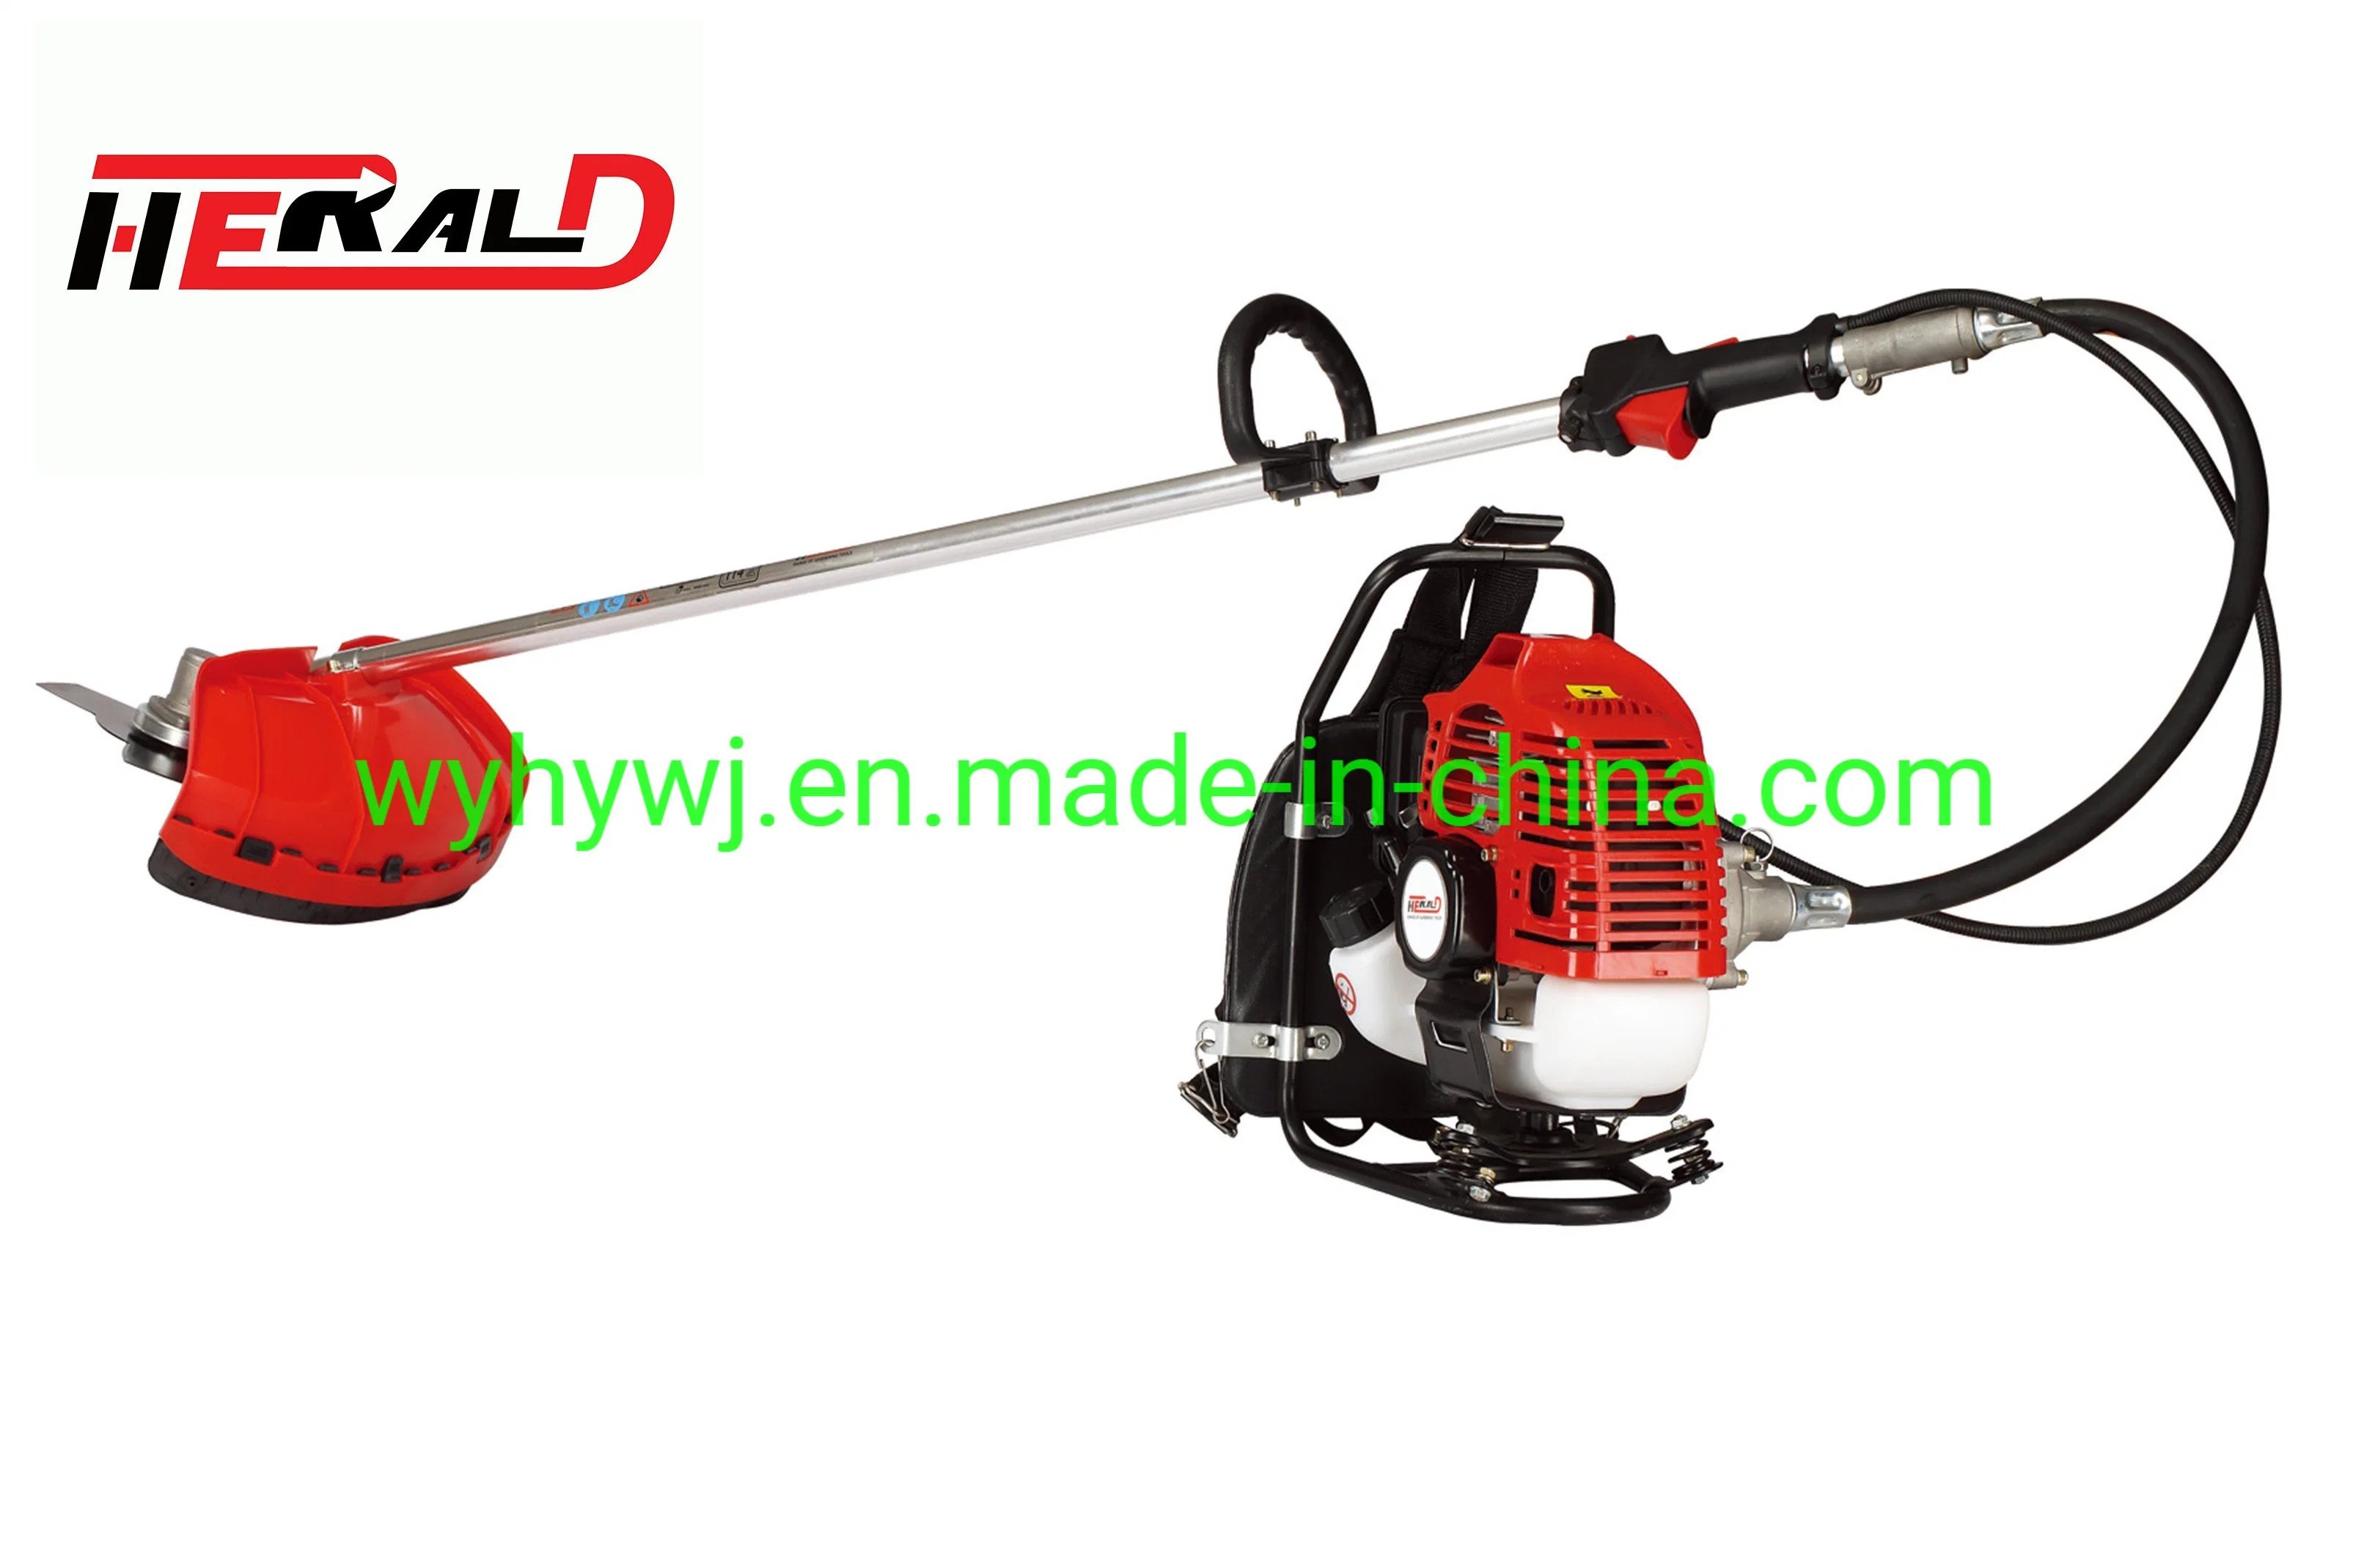 Professional 2 Stroke Good Quality 43cc/52cc Backpack Gasoline Brush Cutter Hy-430K Cut The Grass Easily Garden Tool